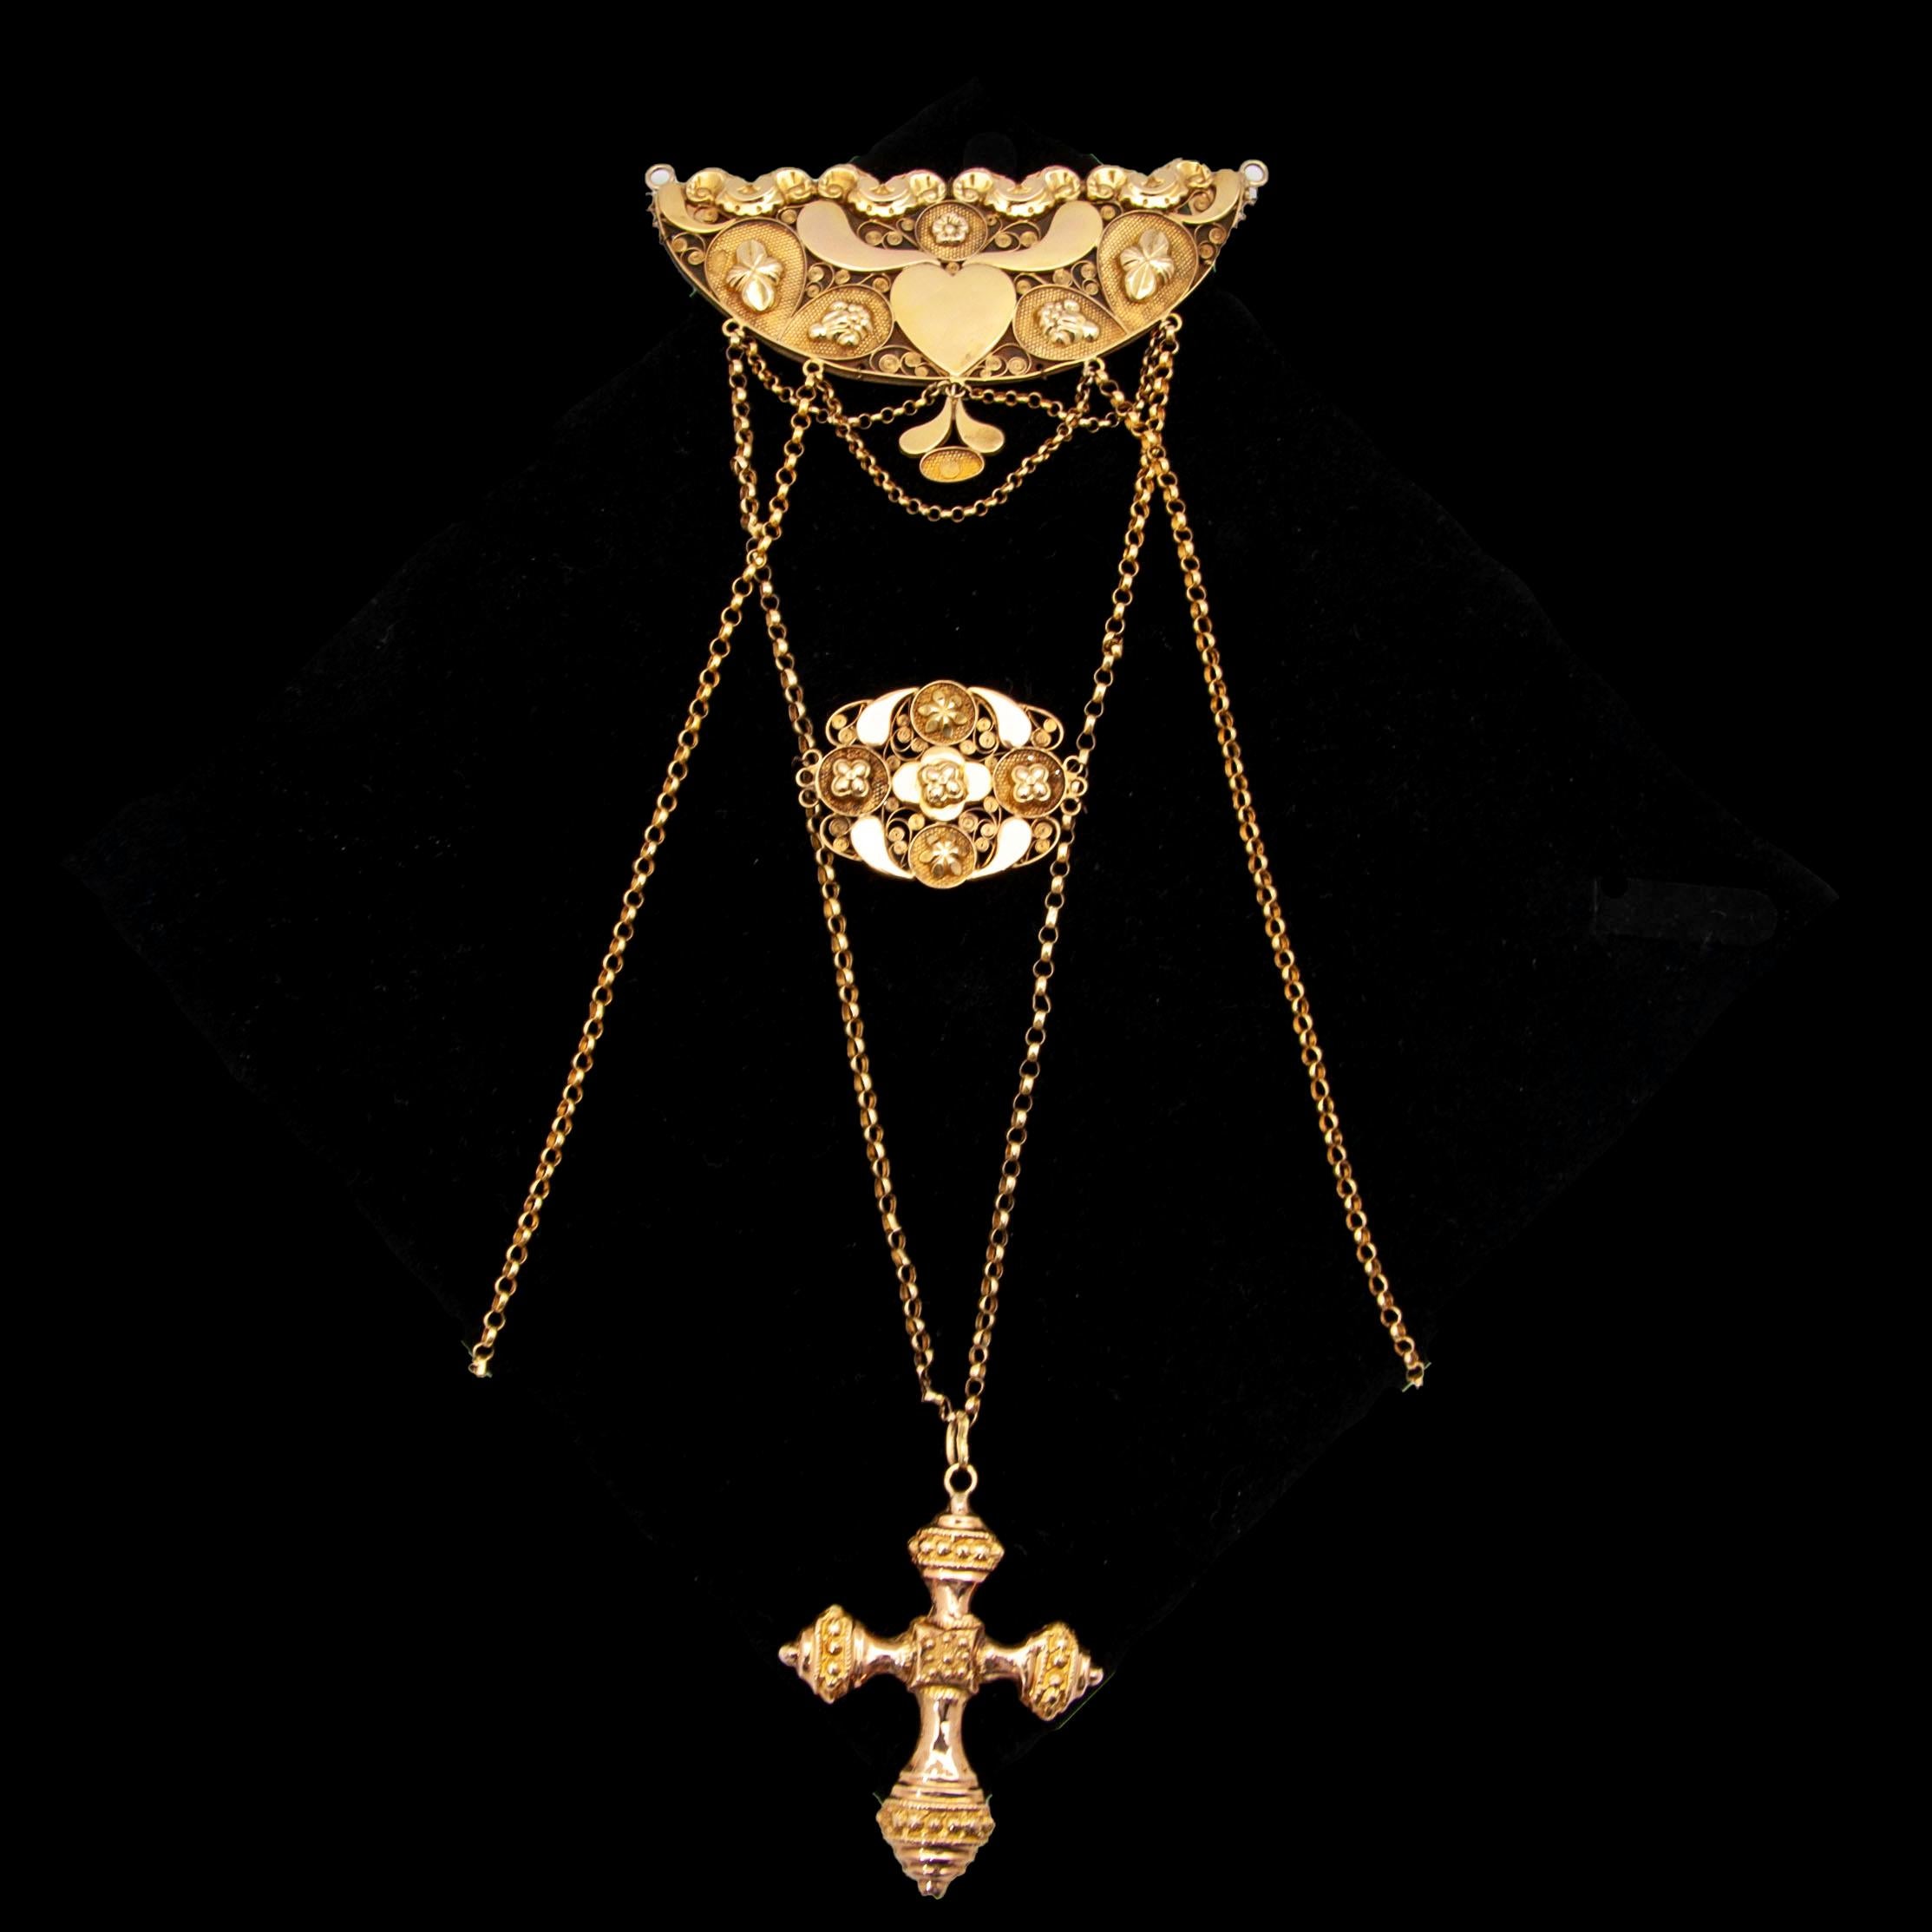 This rare antique mid-19th century religious piece of jewelry is a chestpiece pendant, created in 14 karat gold. Designed with very fine filigree, cannetille work and jasseron chains. This type of religious jewelry, the so-called 'borstzeuge', was